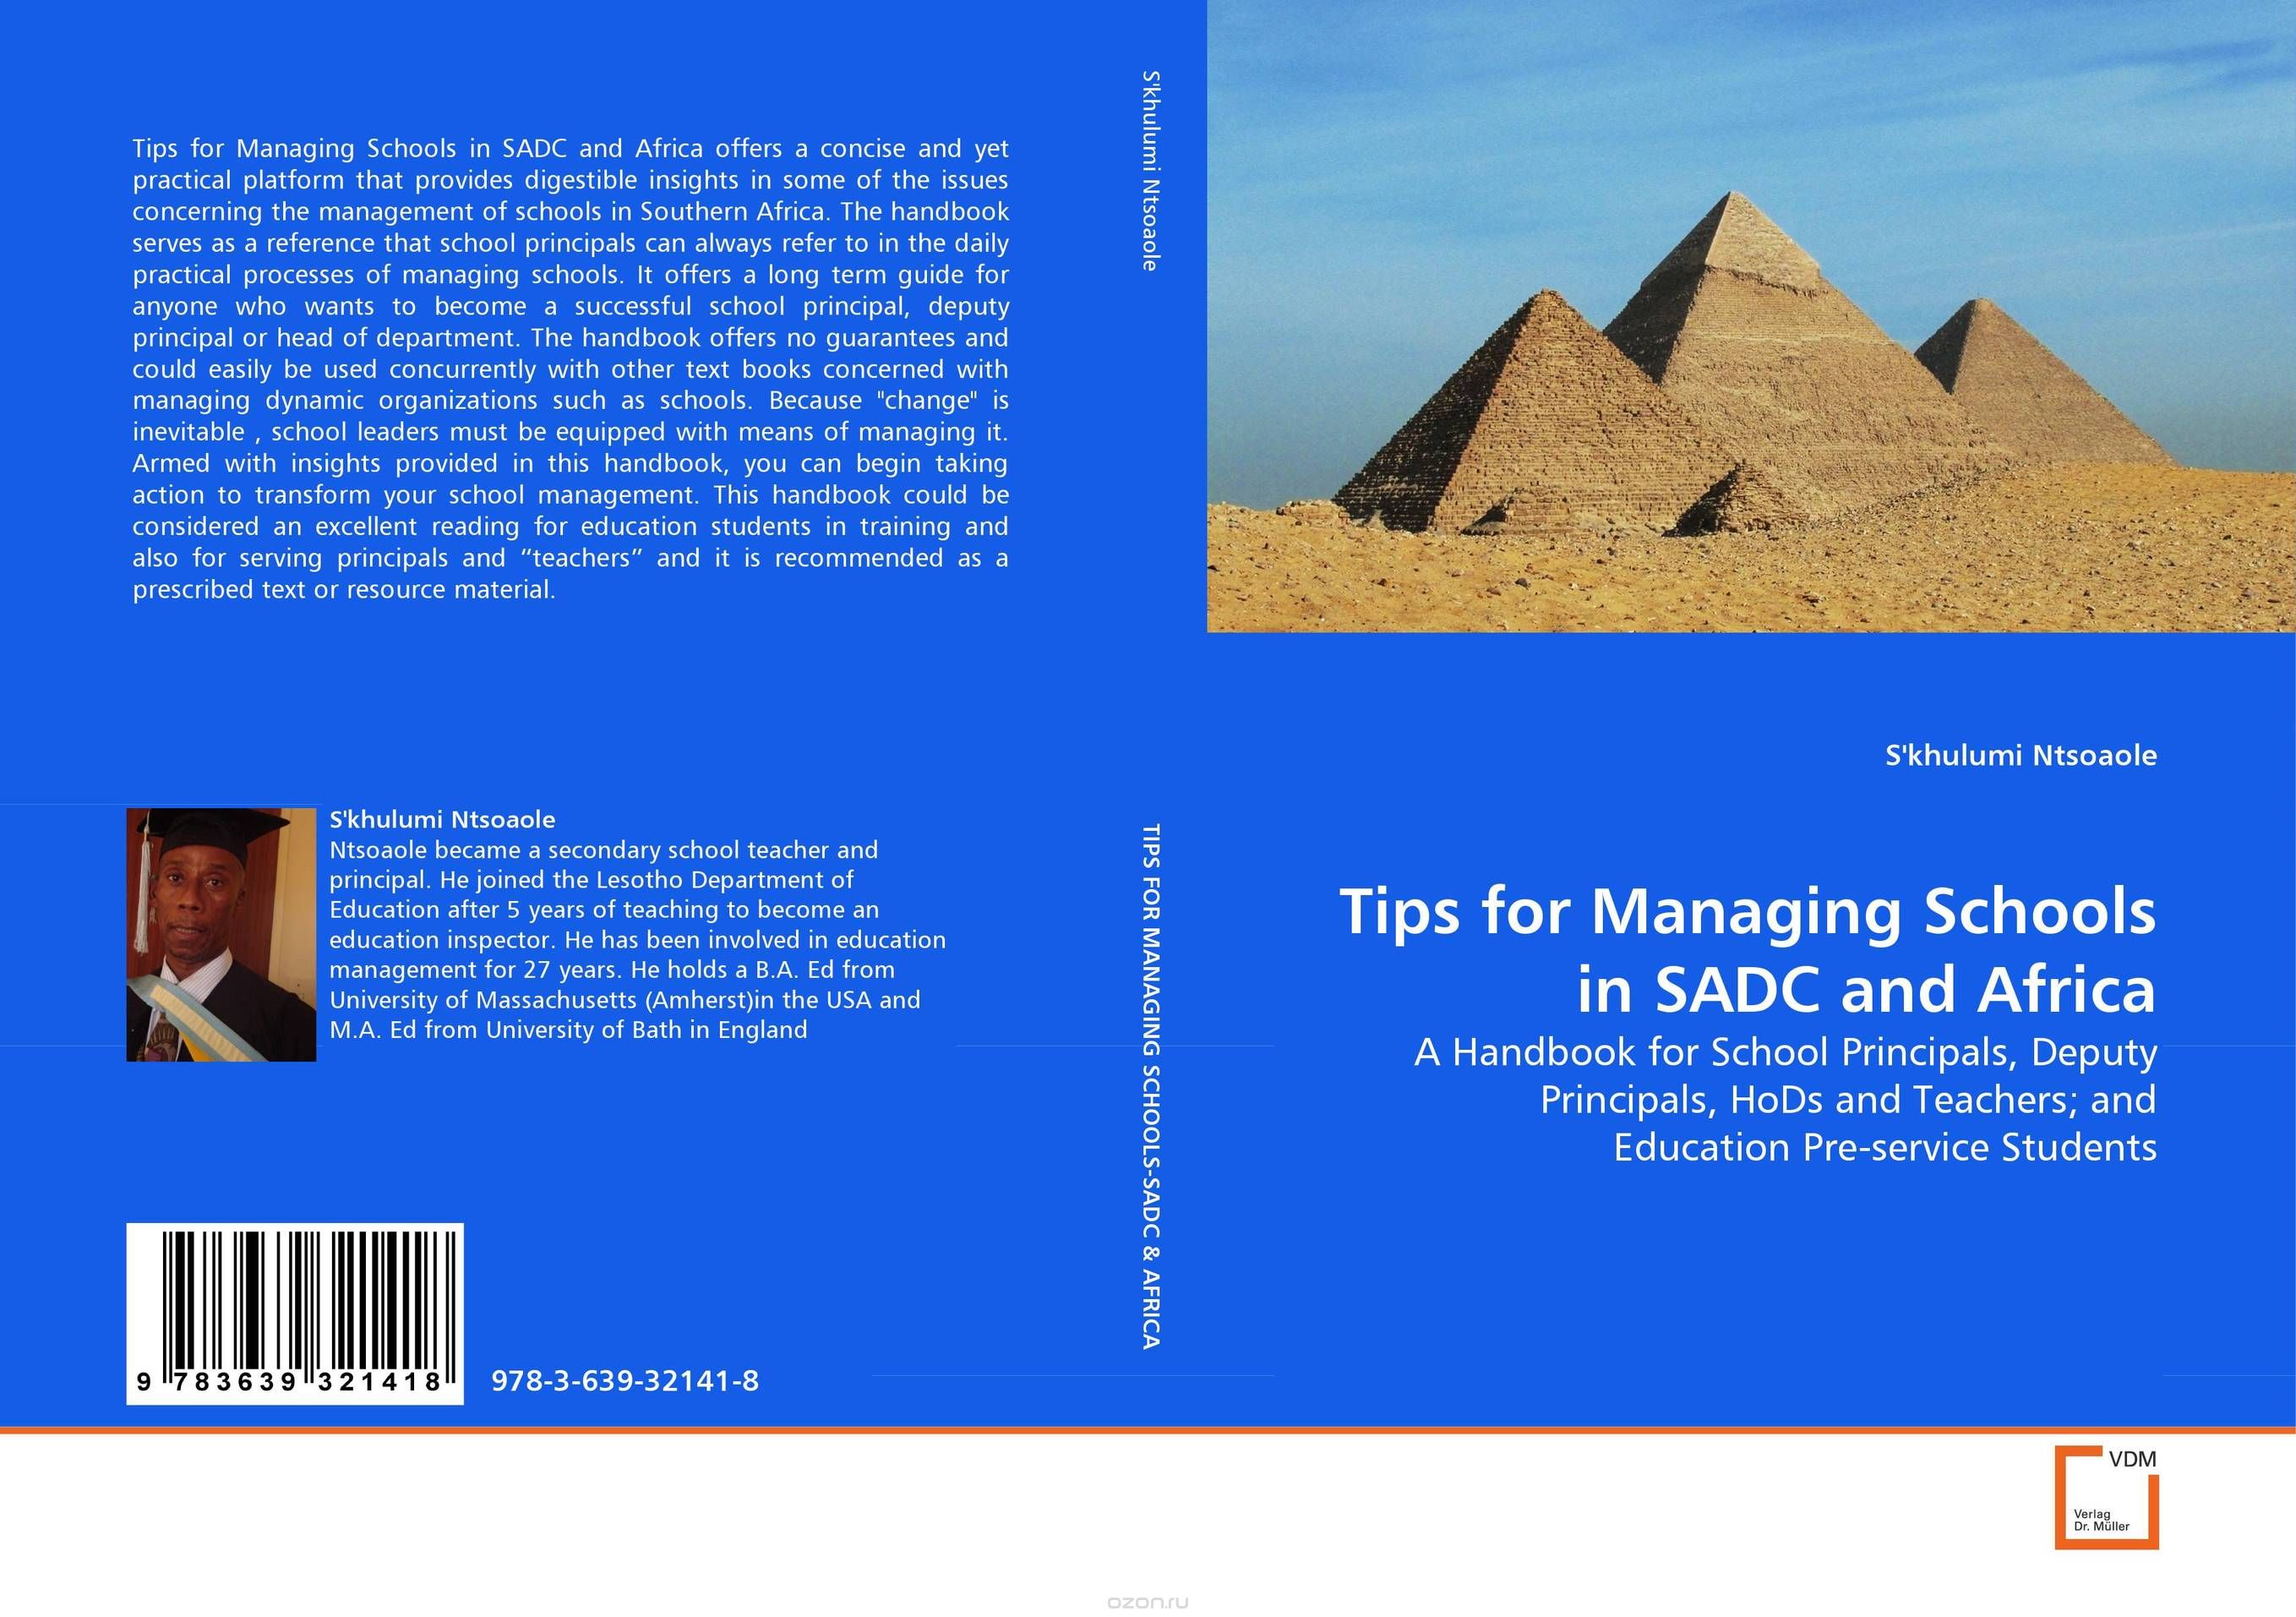 Tips for Managing Schools in SADC and Africa